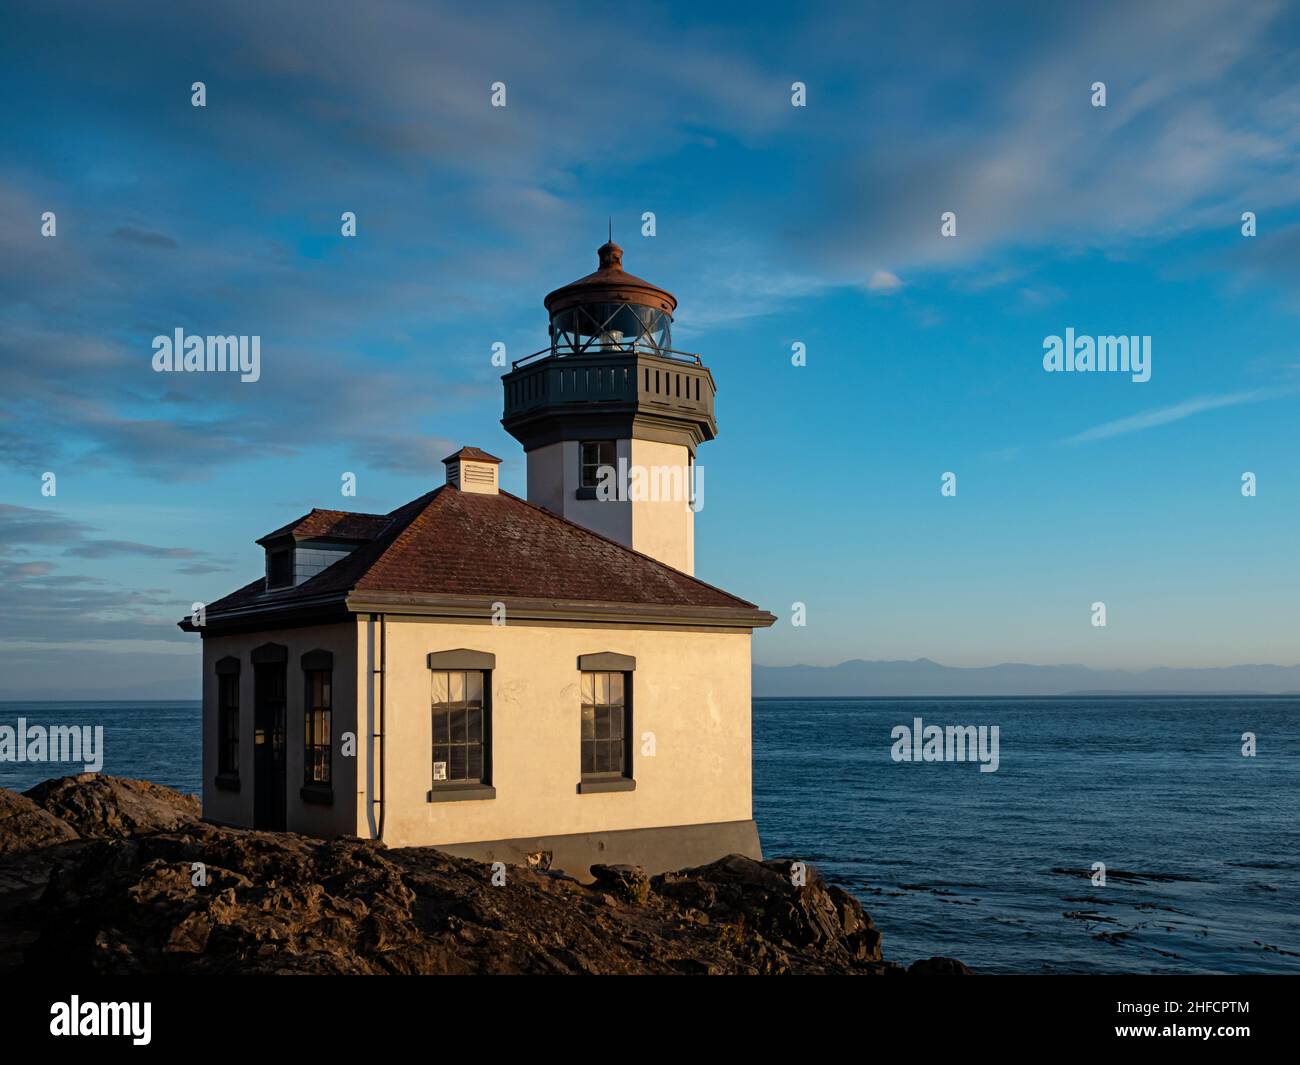 WA21120-00...WASHINGTON - Lime Kiln Lighthouse located on the shores of Haro Strait and is one of the most popular whale watching areas of San Juan Is Stock Photo